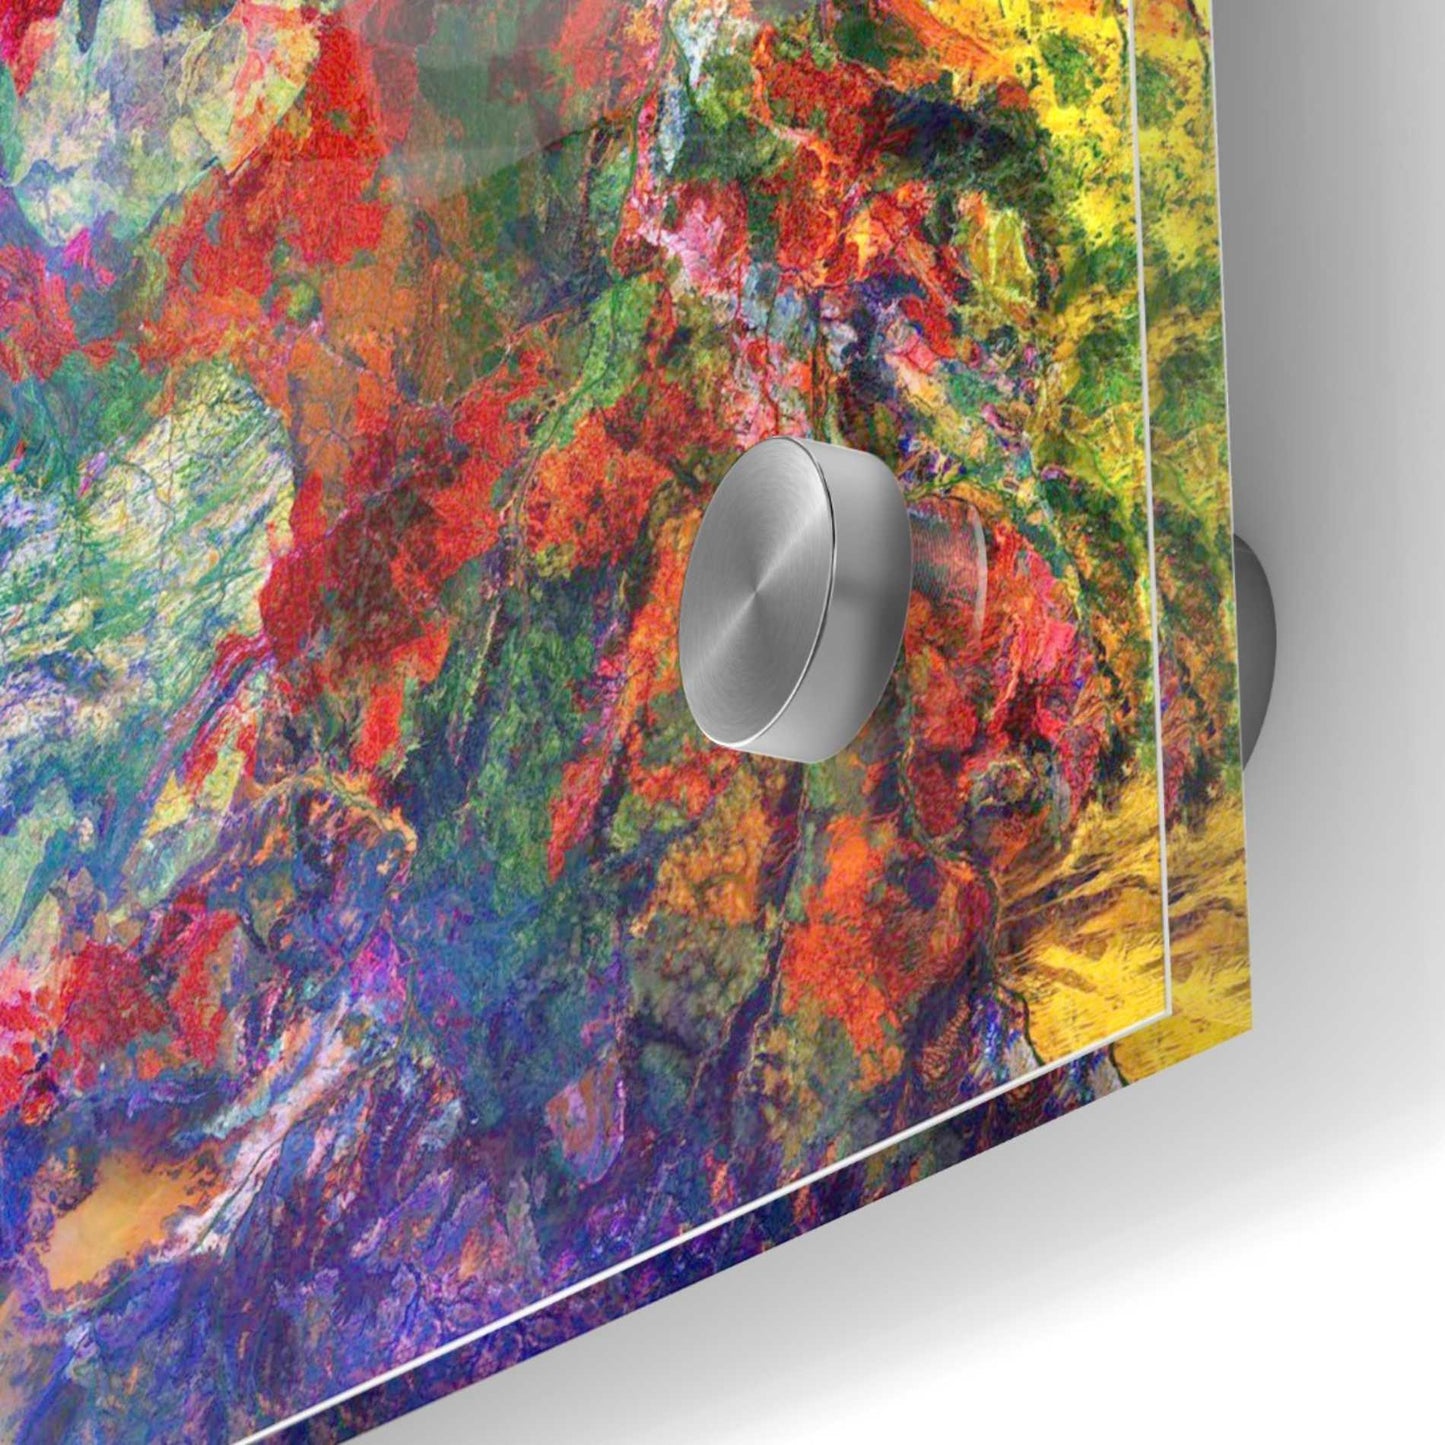 Epic Art 'Earth As Art: Melted Colors' Acrylic Glass Wall Art,24x24